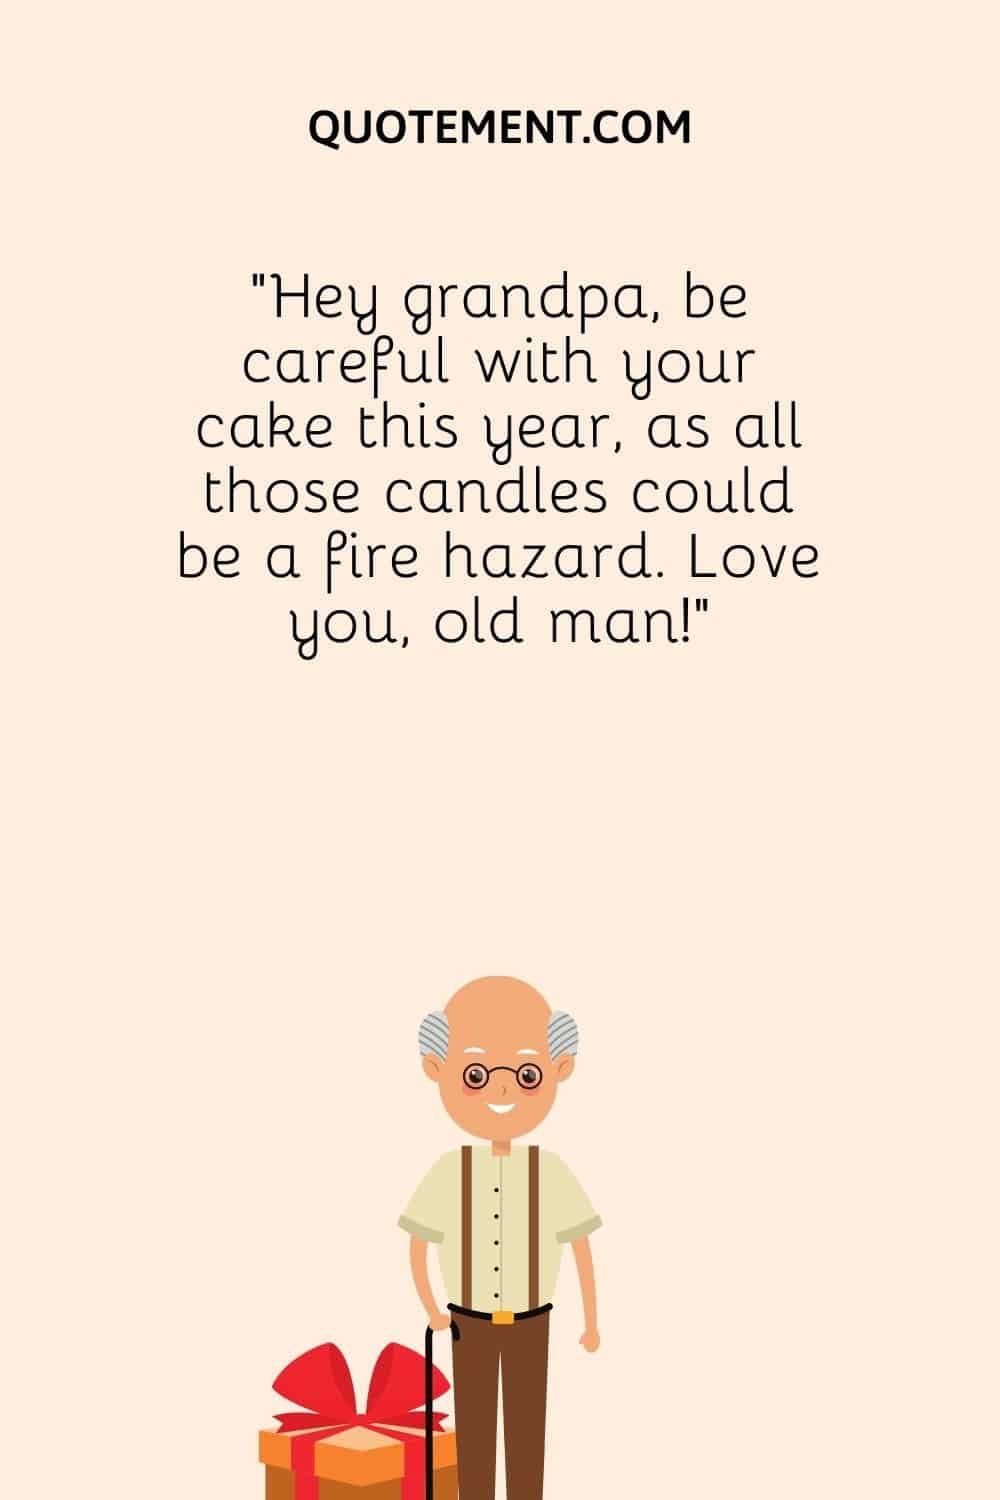 Hey grandpa, be careful with your cake this year, as all those candles could be a fire hazard